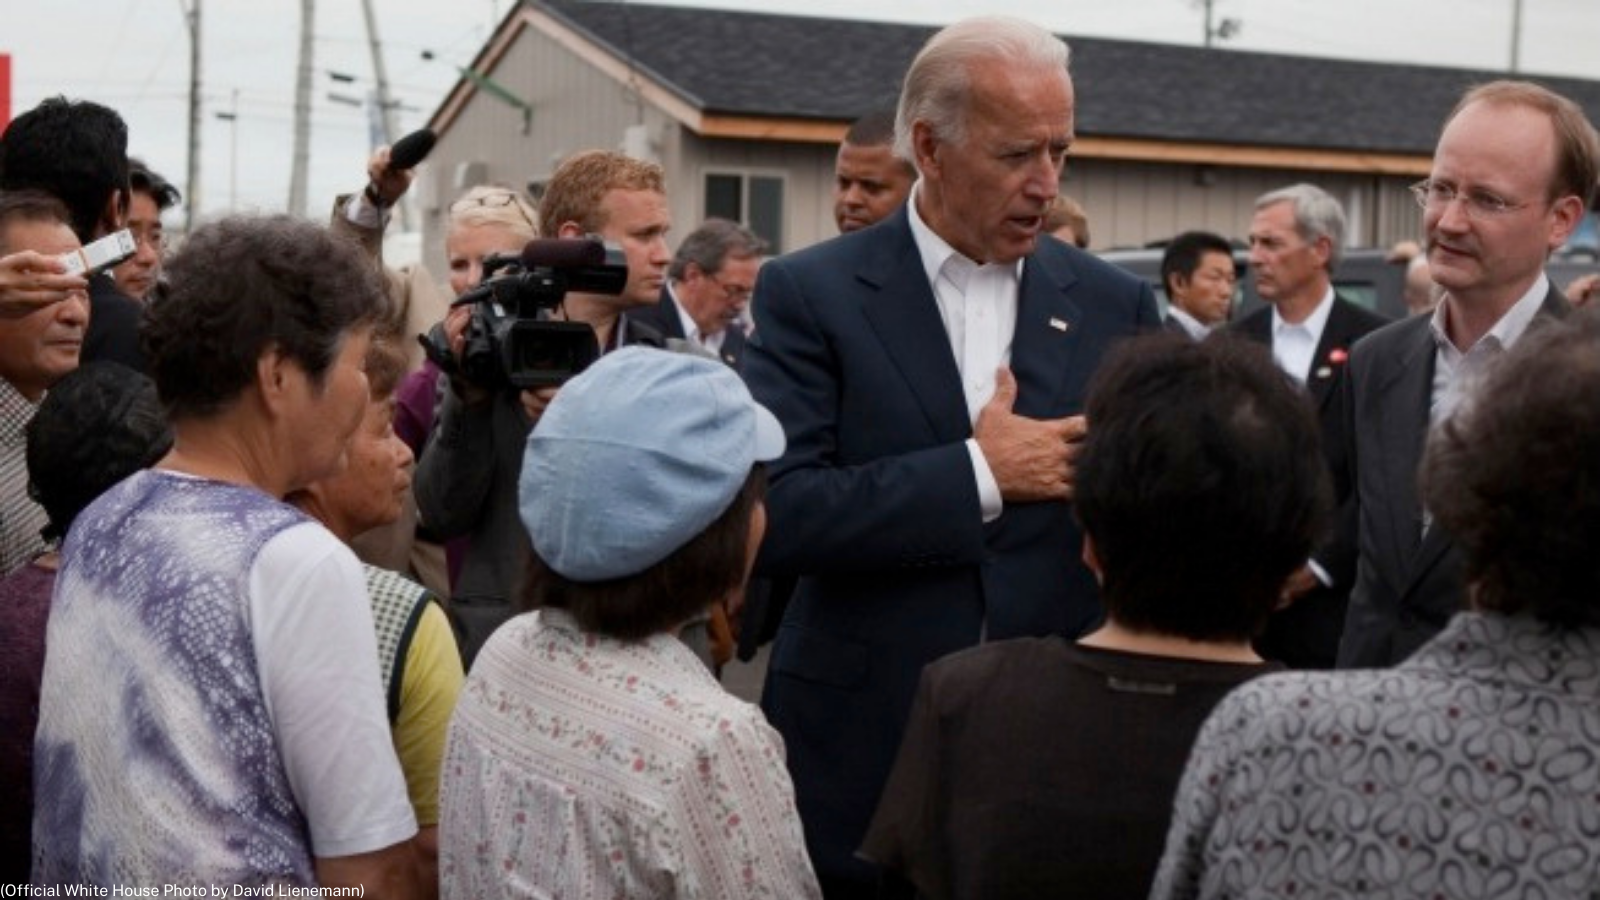 When he was Vice President, President Joe Biden visited Japan and talked to survivors of the tsunami at a temporary housing center in Natori City, Japan on August 23, 2011. (Official White House Photo by David Lienemann)